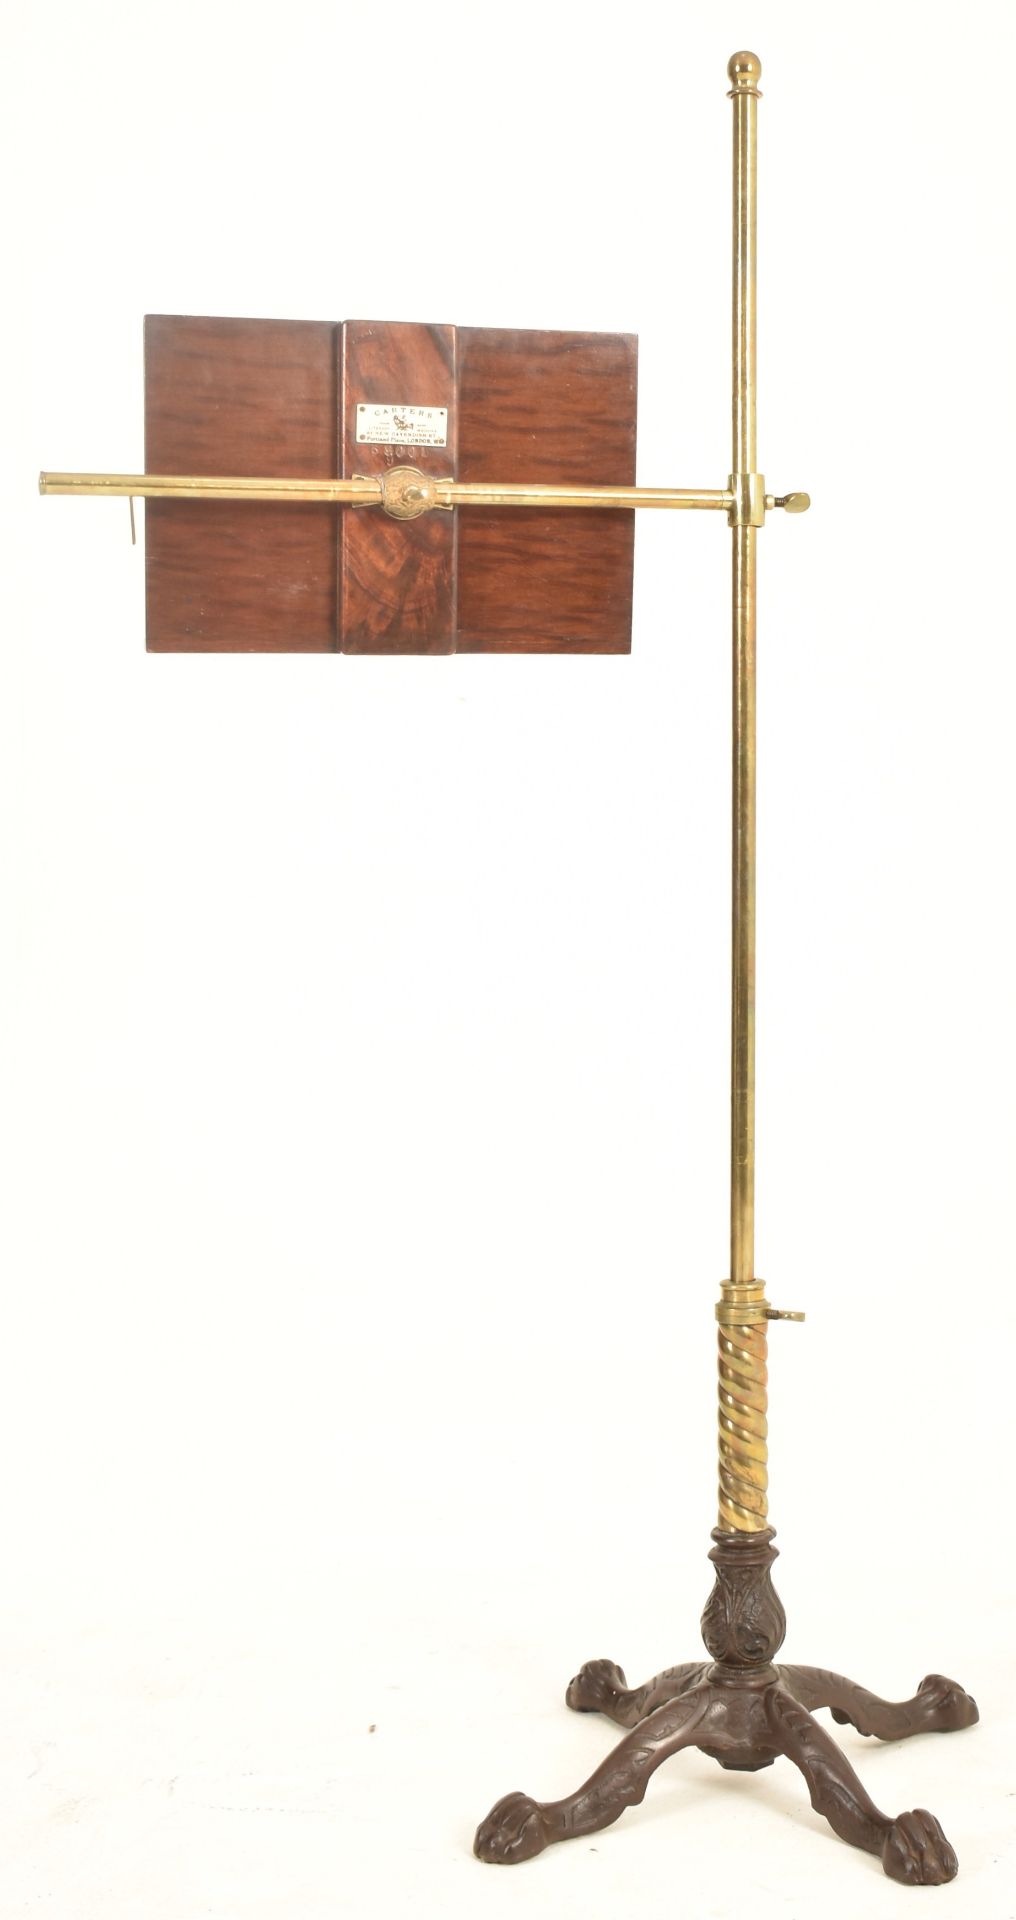 VICTORIAN BRASS & MAHOGANY FLOOR MUSIC STAND LECTERN - Image 7 of 7